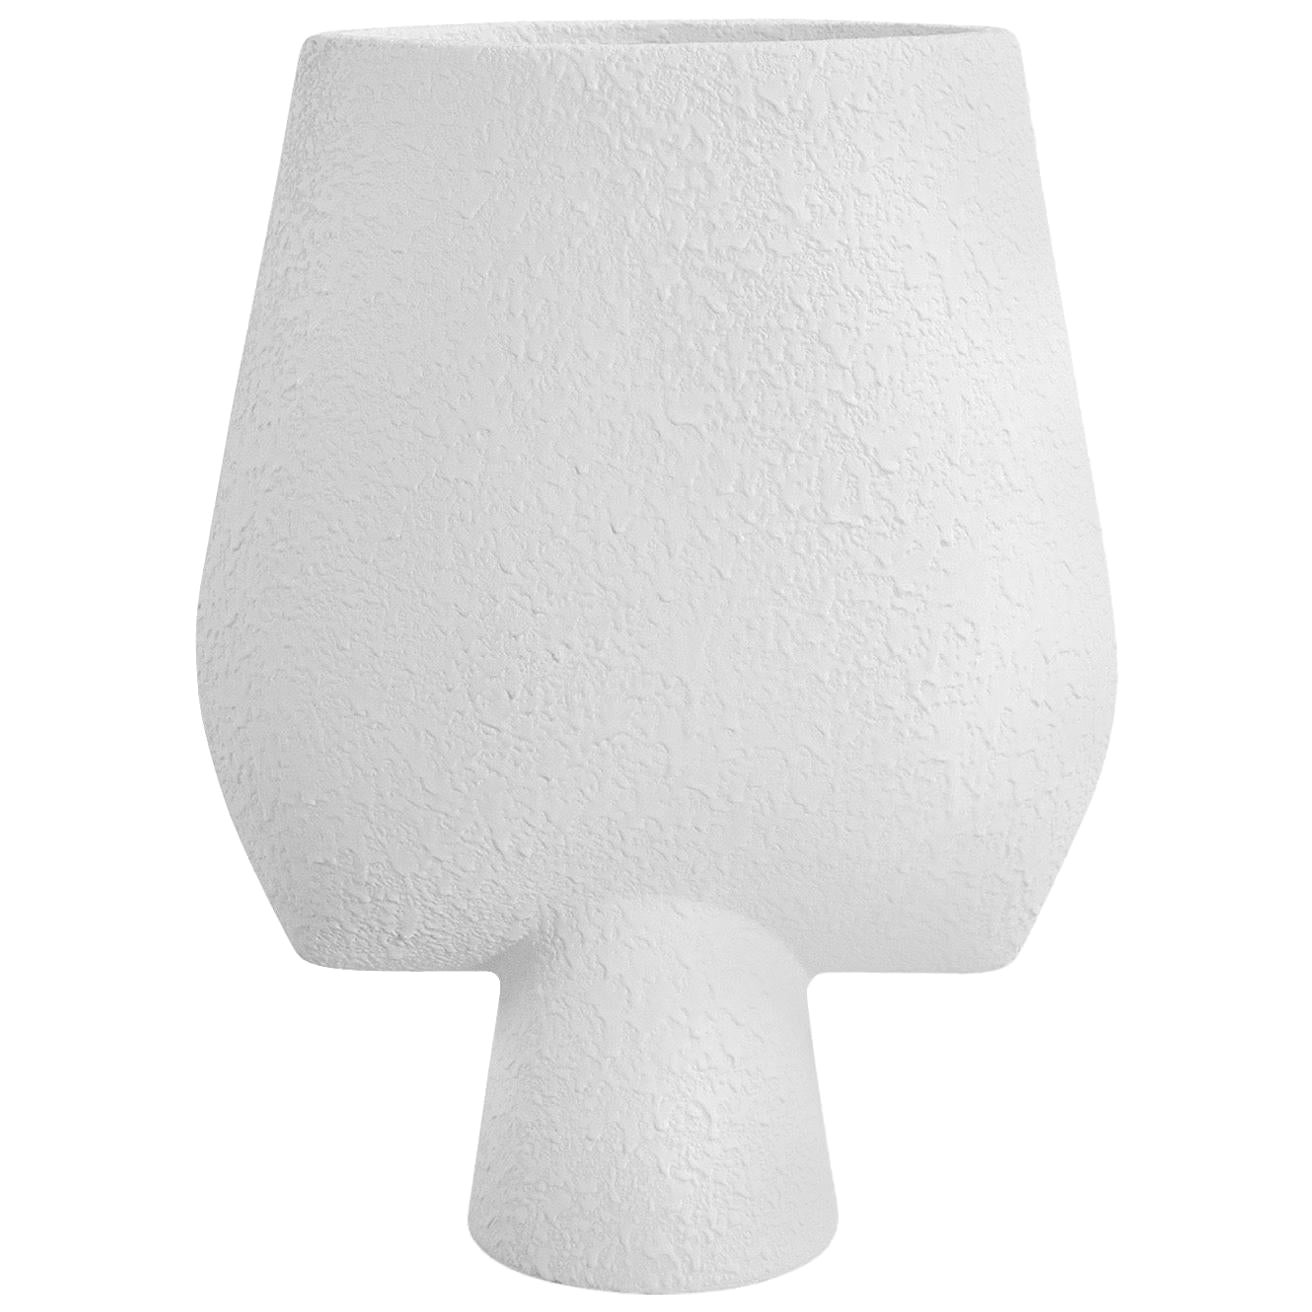 Tall White Arrow Shaped Textured Ceramic Vase, Denmark, Contemporary For Sale